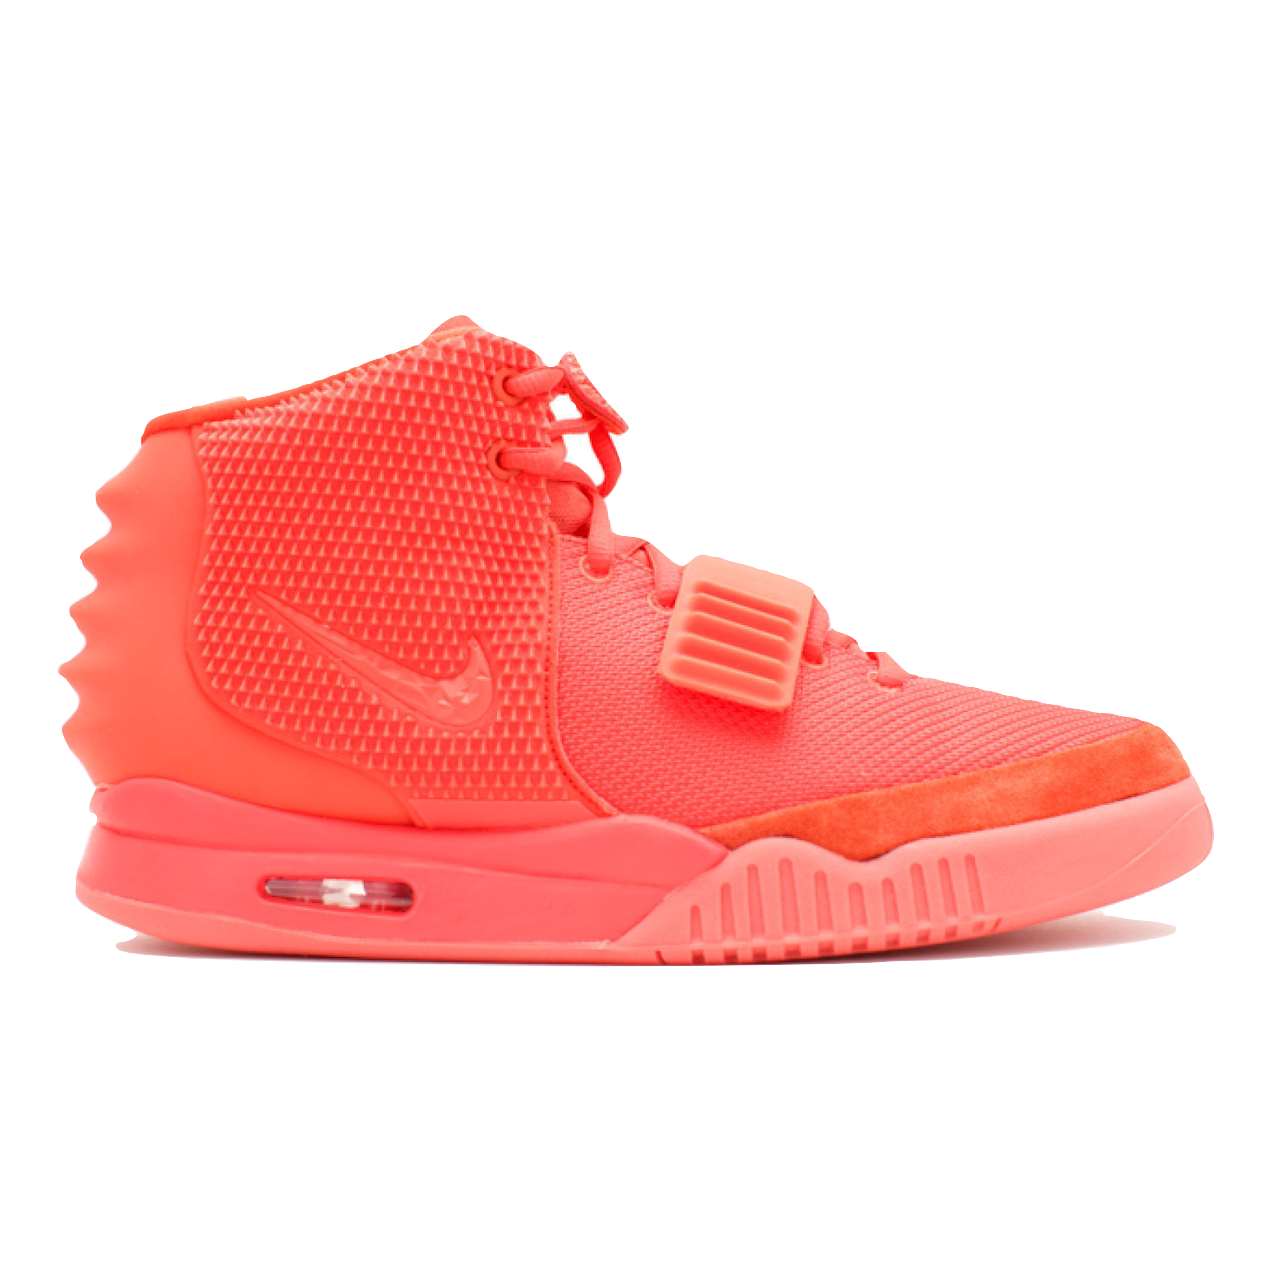 Air Yeezy 2 - Red October - Used